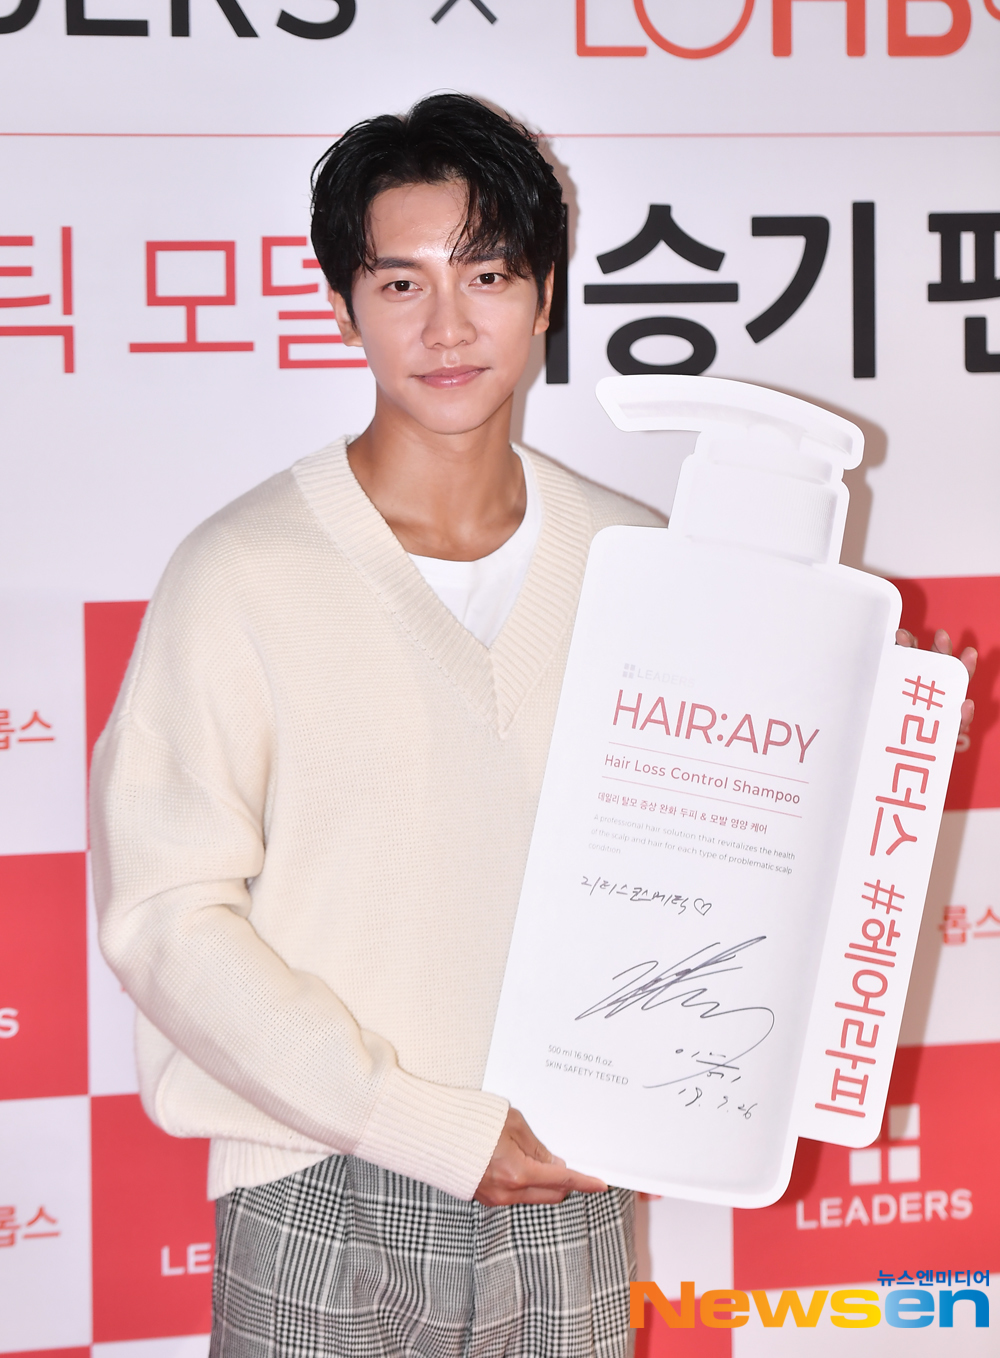 Actor Lee Seung-gi attended a parent cosmetics brand fan signing ceremony in Itaewon, Seoul City Yongsan District, on the afternoon of September 26.expressiveness